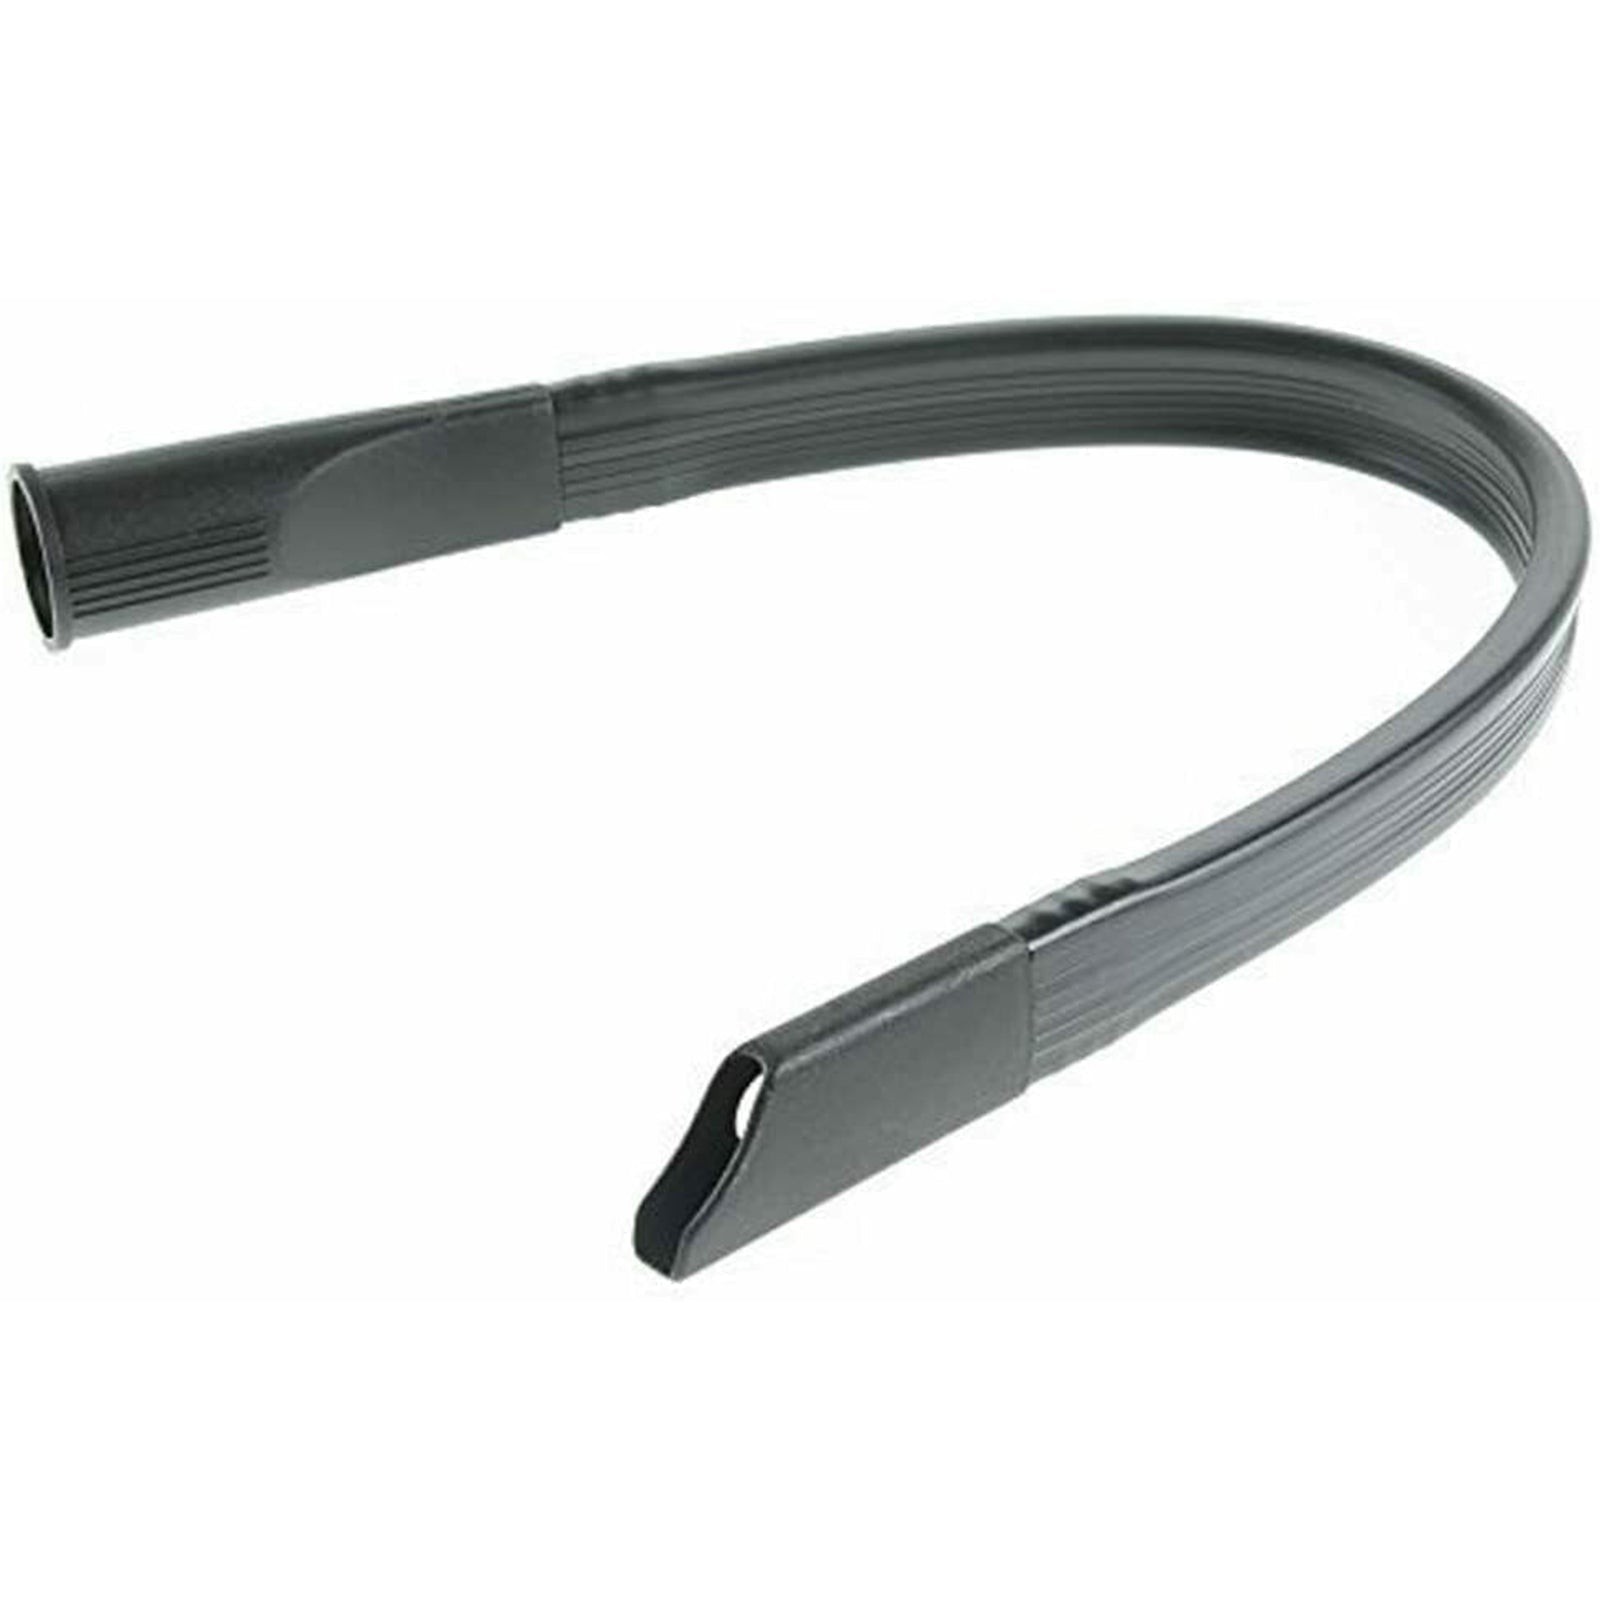 Flexible Crevice Tool Extra Long compatible with VICTOR Vacuum Cleaner (32mm)